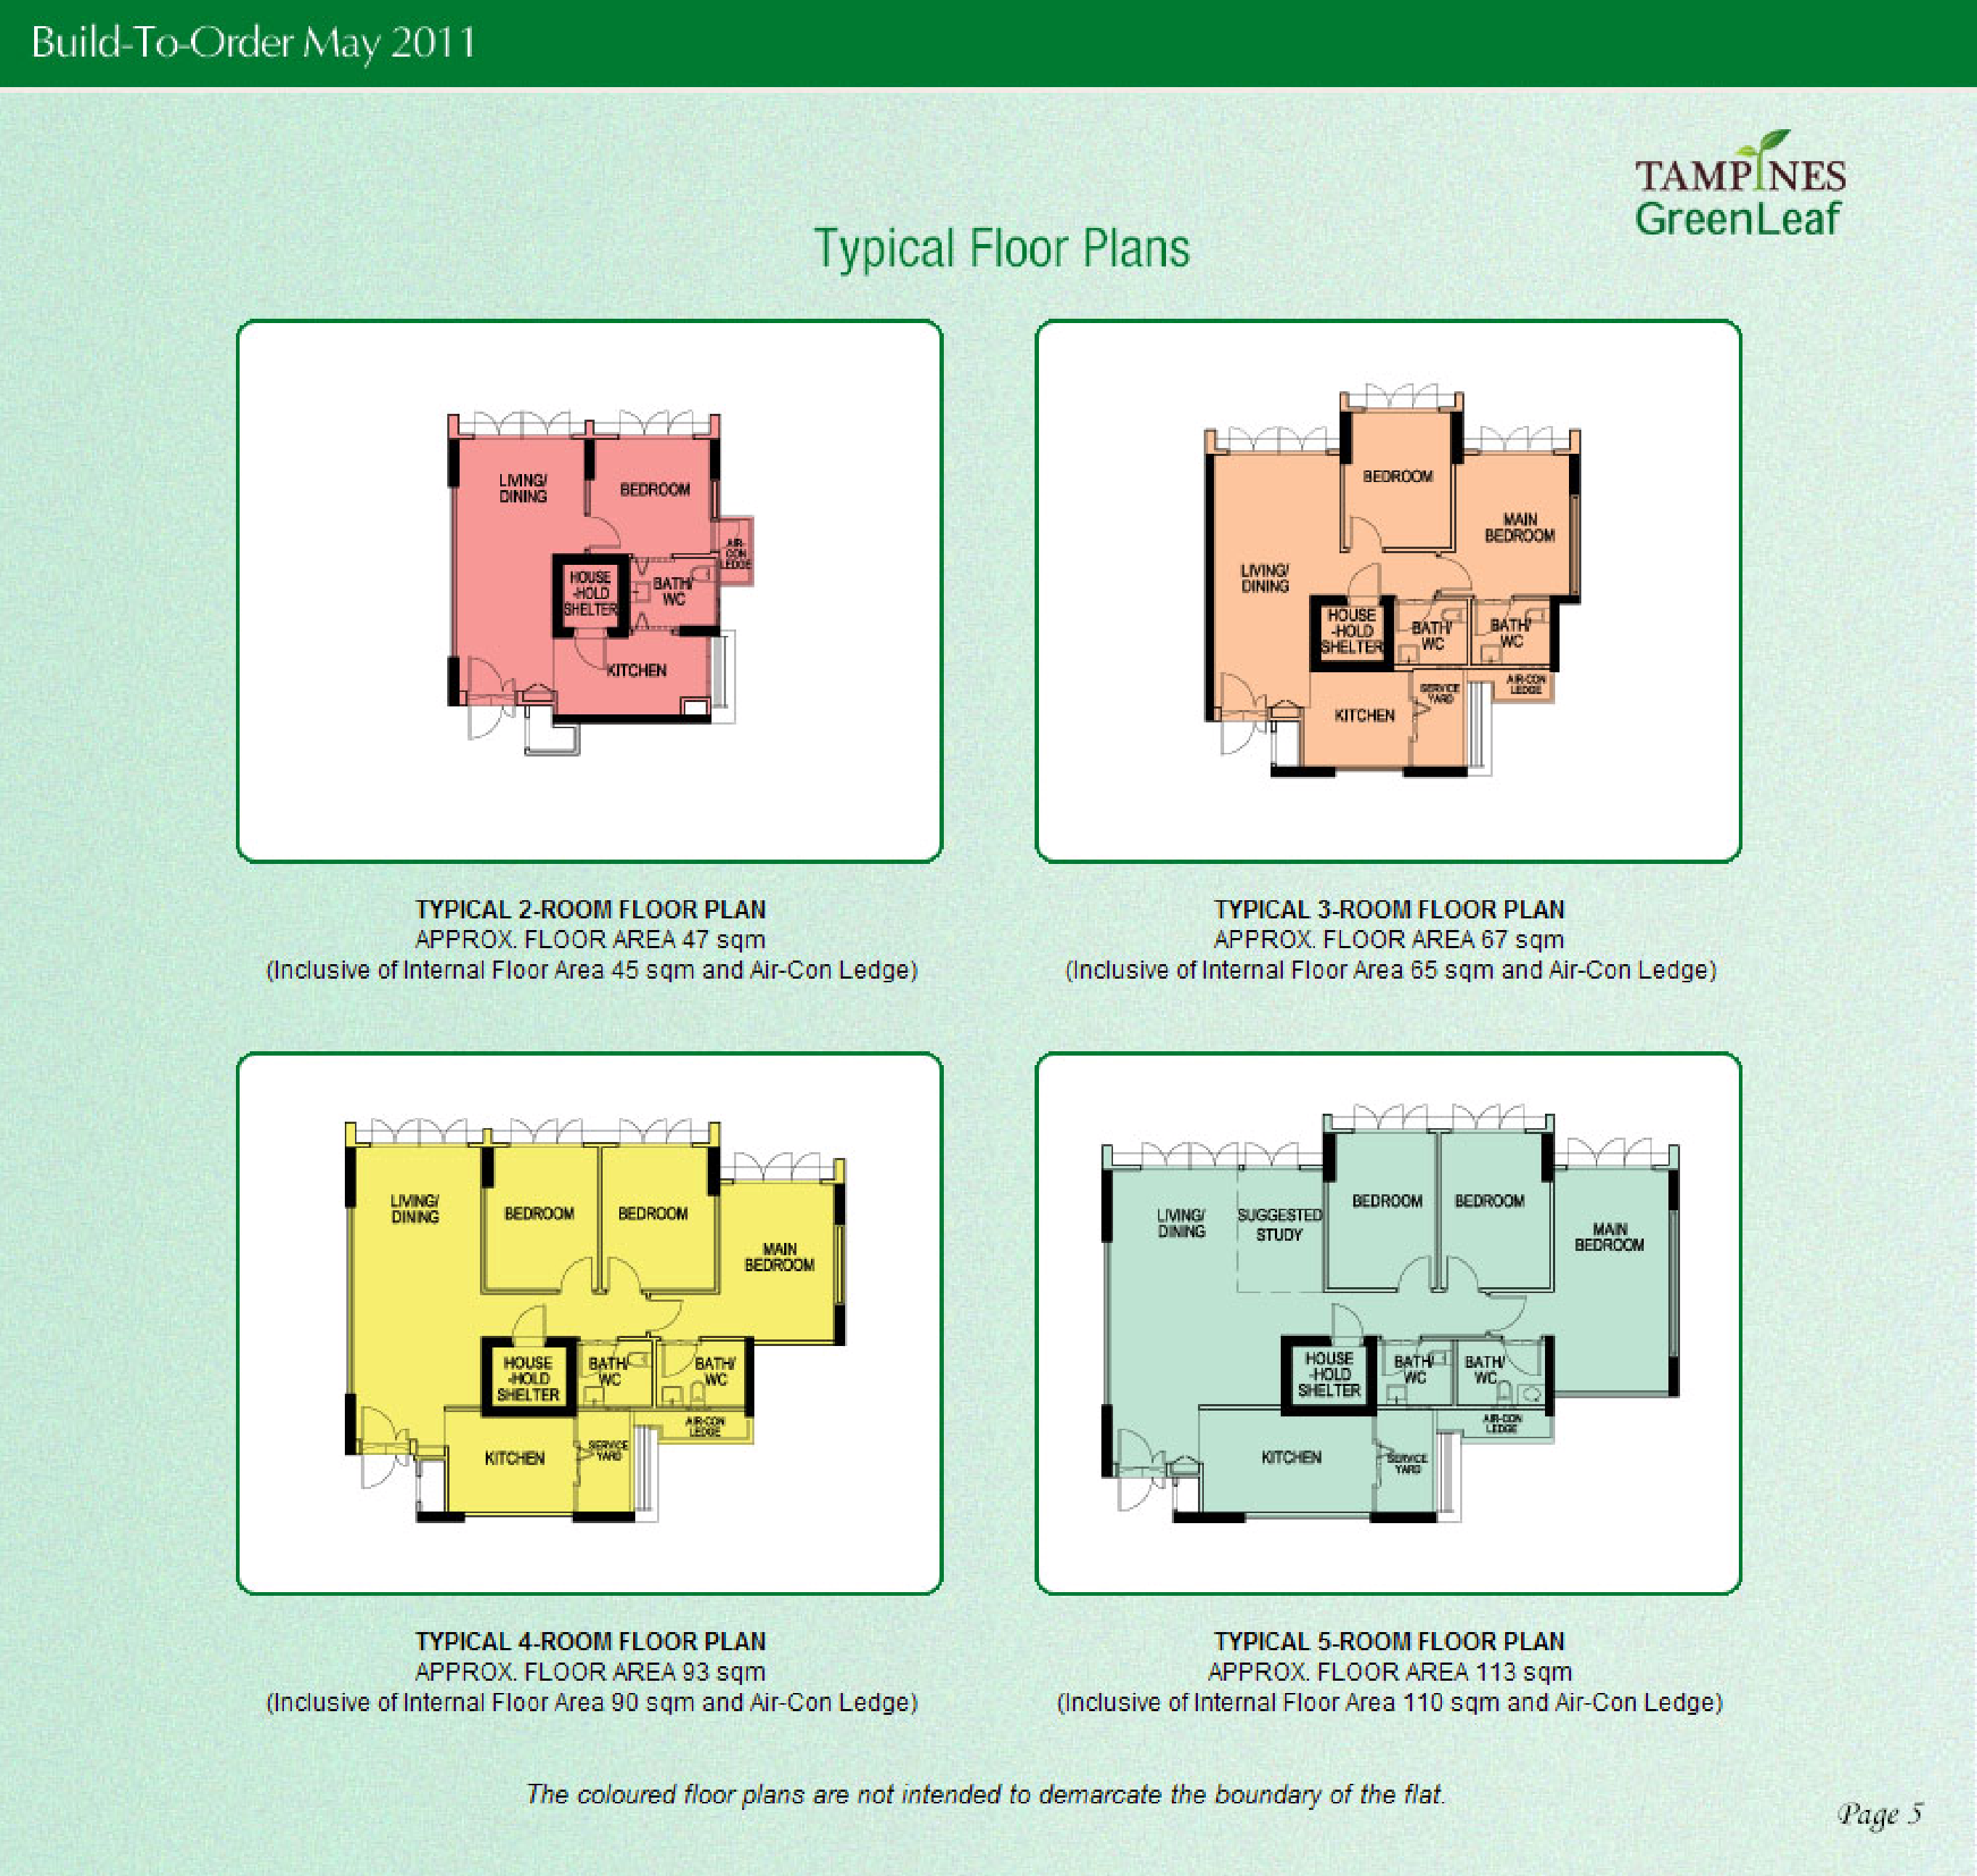 Hdb Tampines Greenleaf Bto Launched In May 2011 Site Plan And